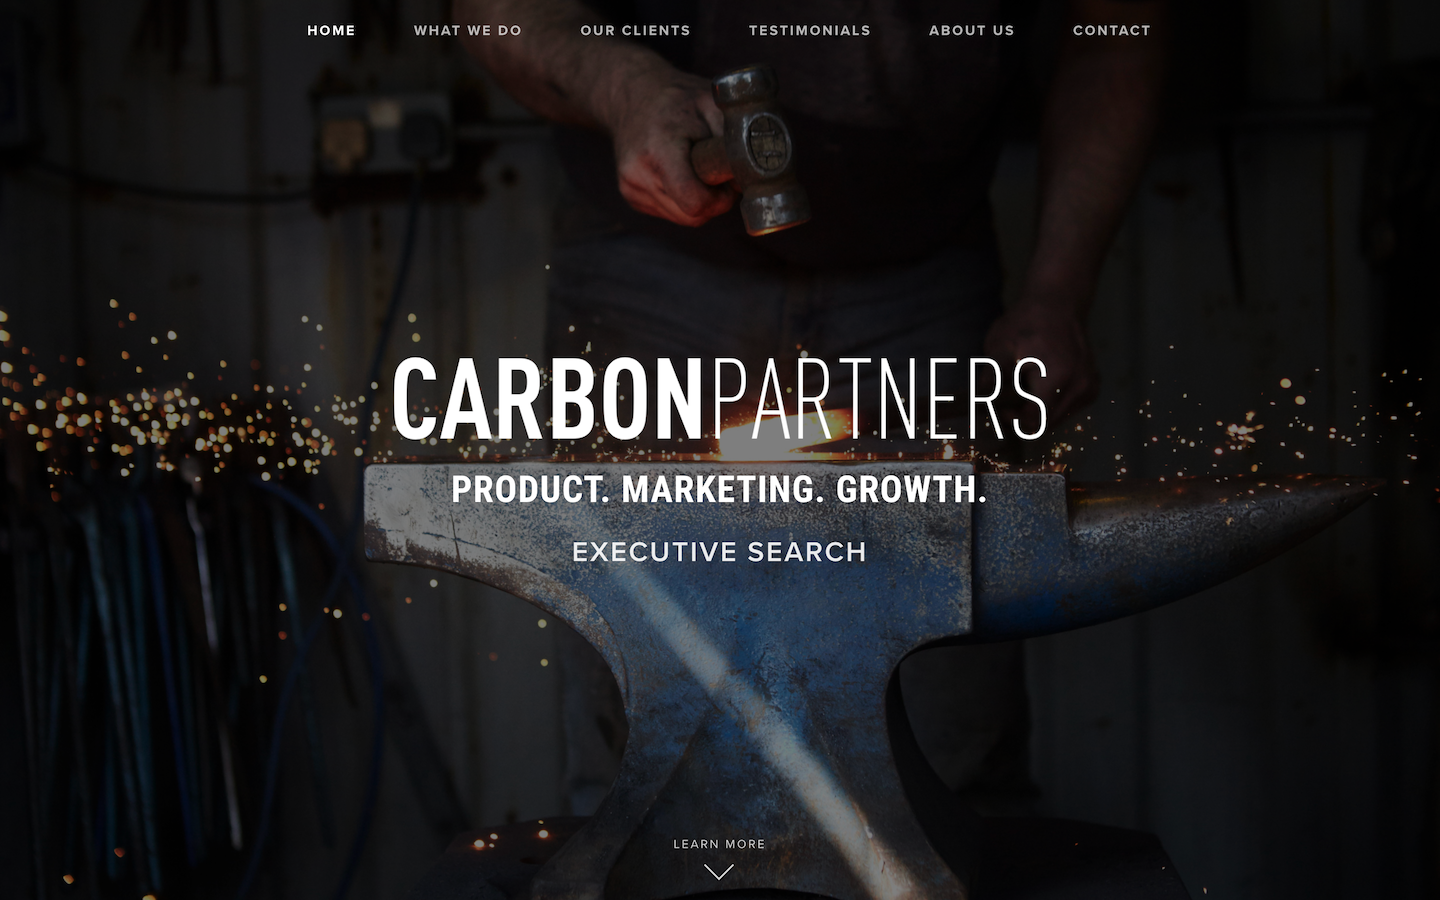 www.carbonpartners.io_(Laptop with HiDPI screen).png